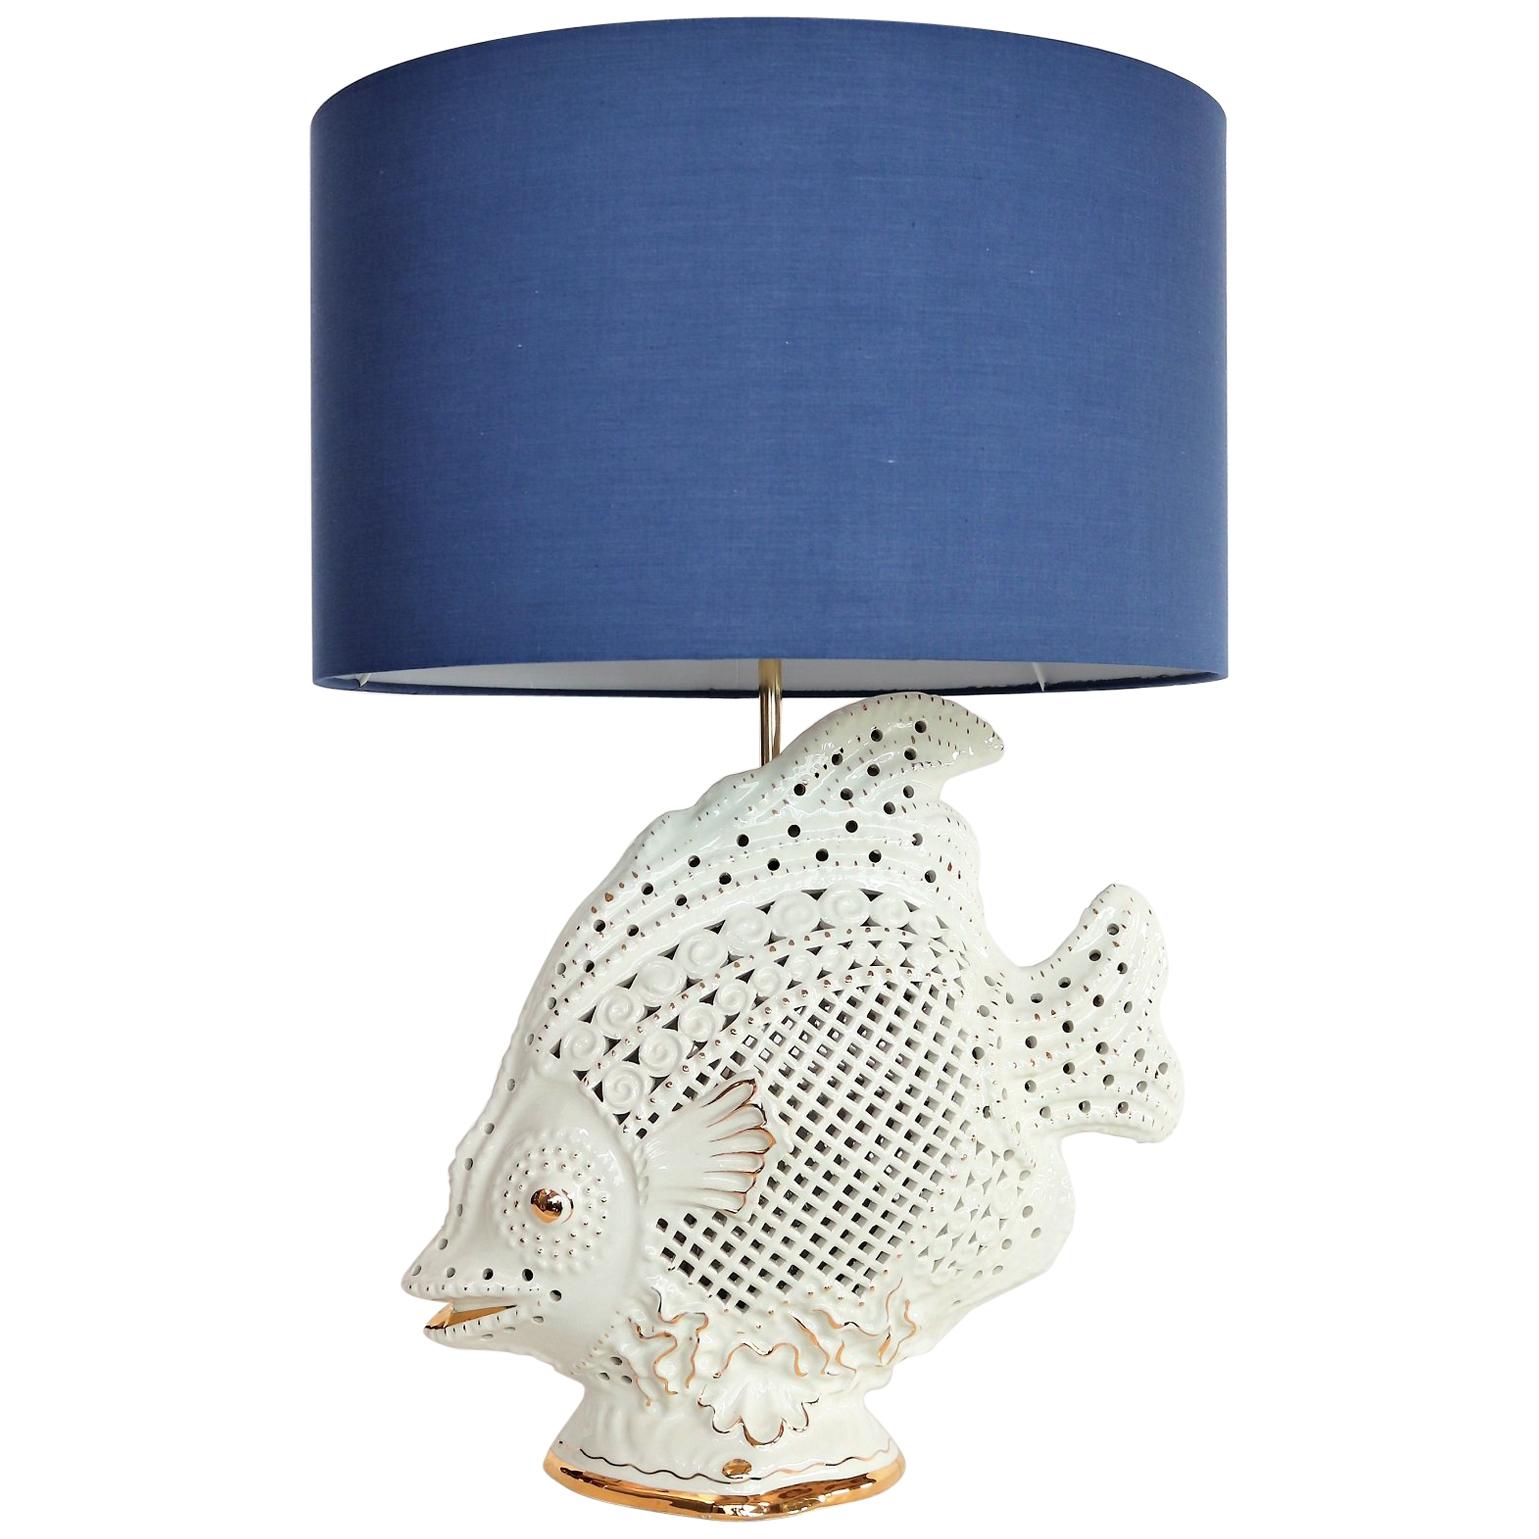 Italian Midcentury Big Ceramic Fish Lamp with Brass Details, 1960s For Sale